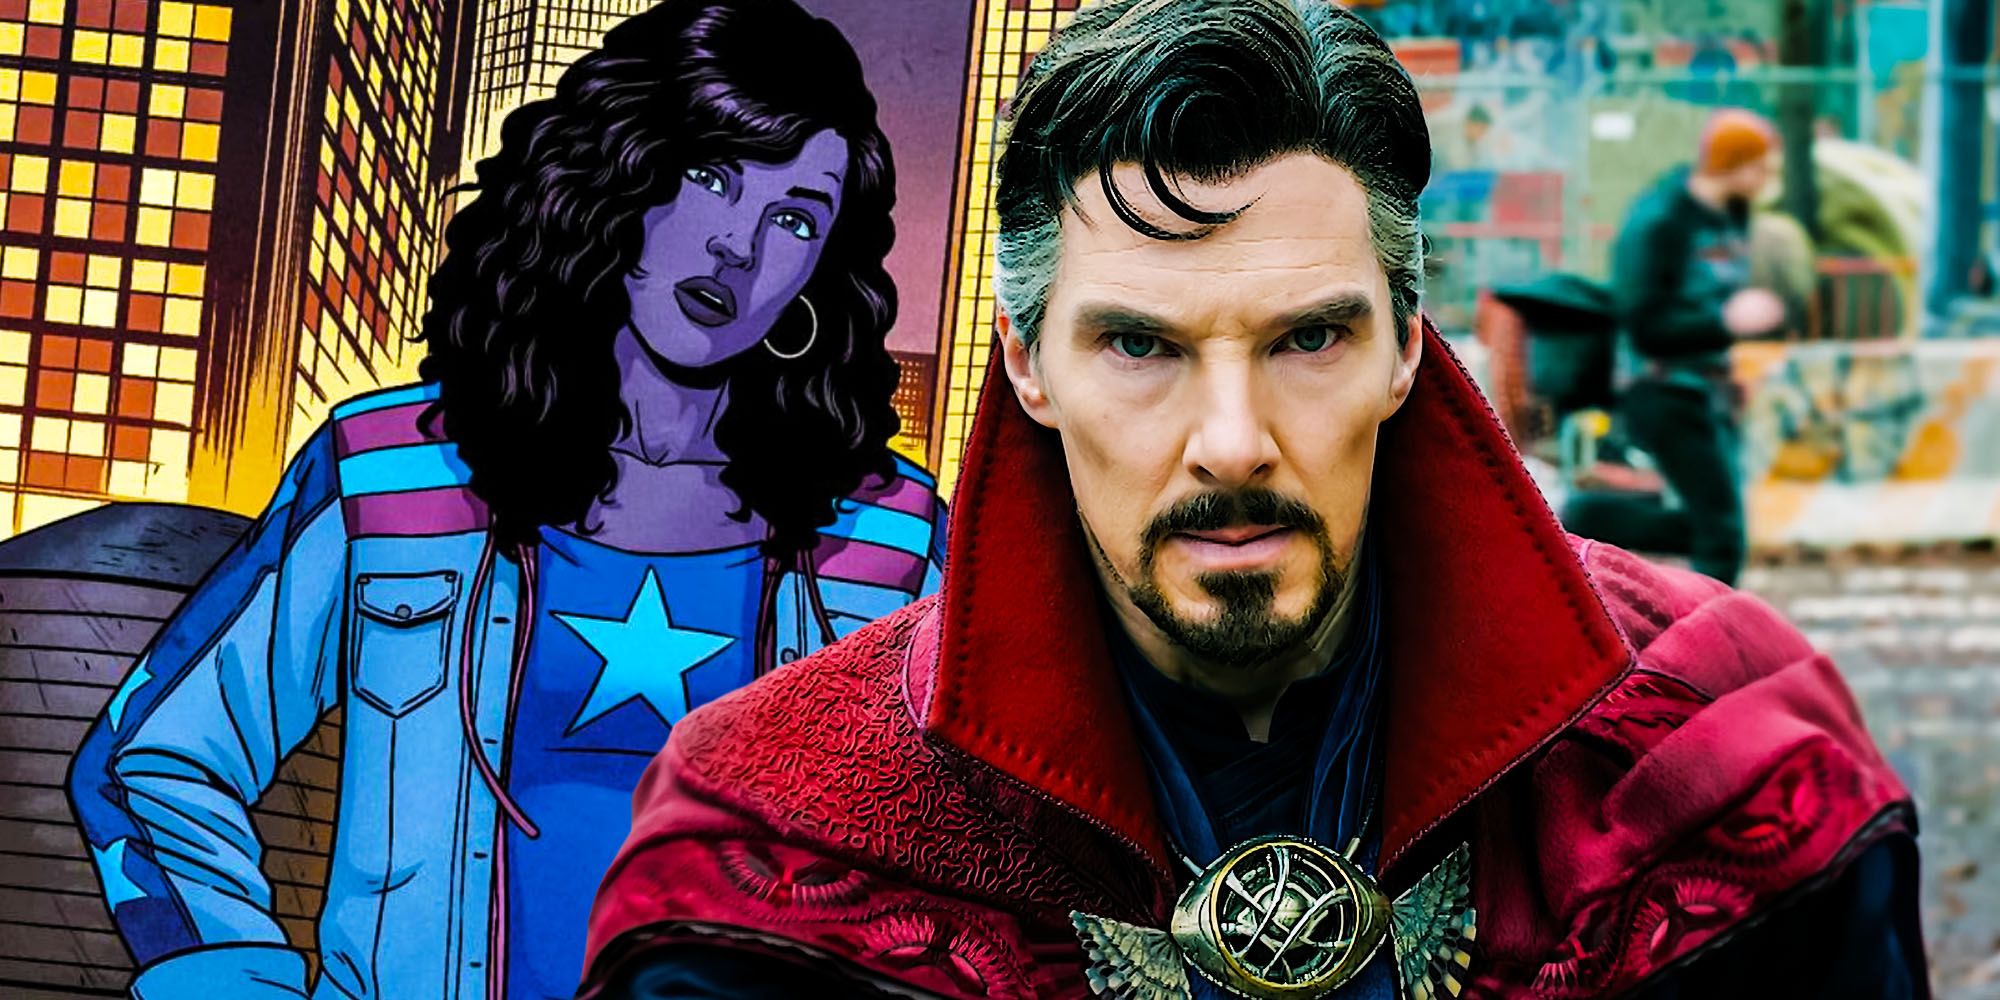 Doctor strange in the multiverse of madness has a character as strong as an infinity stone america chavez